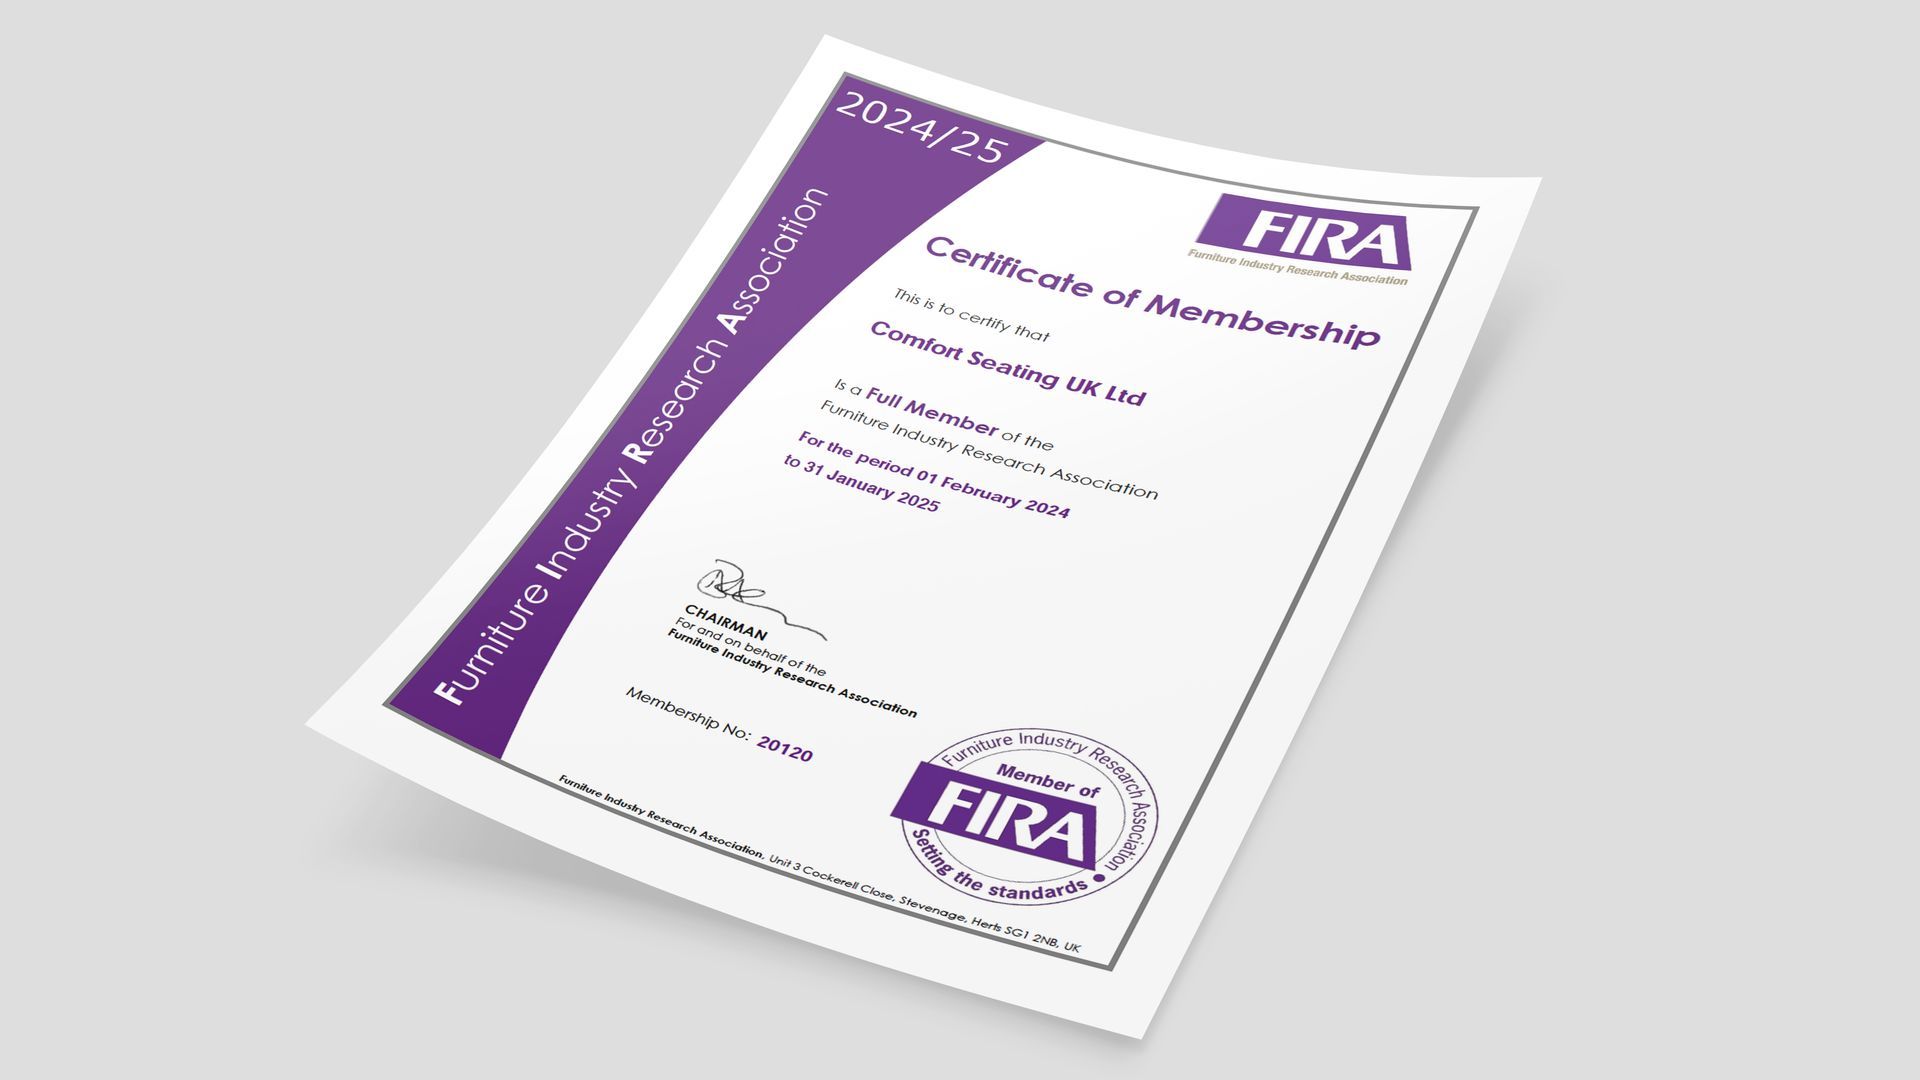 A photo of the FIRA membership certificate to certify that Comfort Seating - owner of Ergohuman - is a full member. 